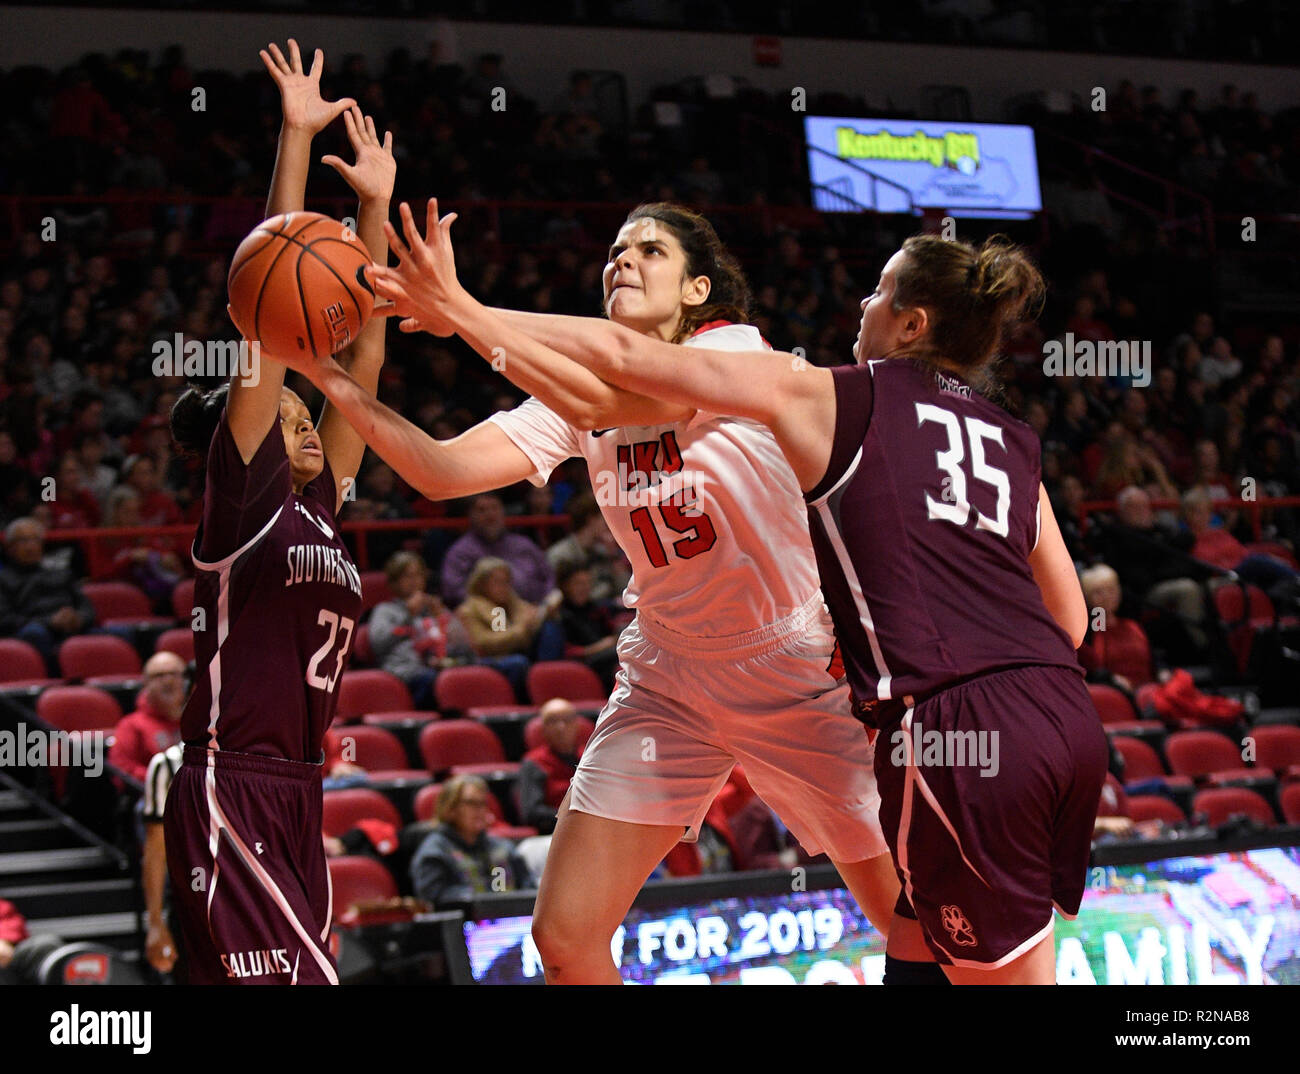 November 20, 2018; Western Kentucky Hilltoppers forward Raneem Elgedawy (15) gets fouled by Southern Illinois Salukis forward/center Celina VanHyfte (35) during a NCAA basketball game between the Southern Illinois Salukis and the Western Kentucky Hilltoppers at E. A. Diddle Arena in Bowling Green, KY. (Mandatory Photo Credit: Steve Roberts/Cal Sport Media) Stock Photo